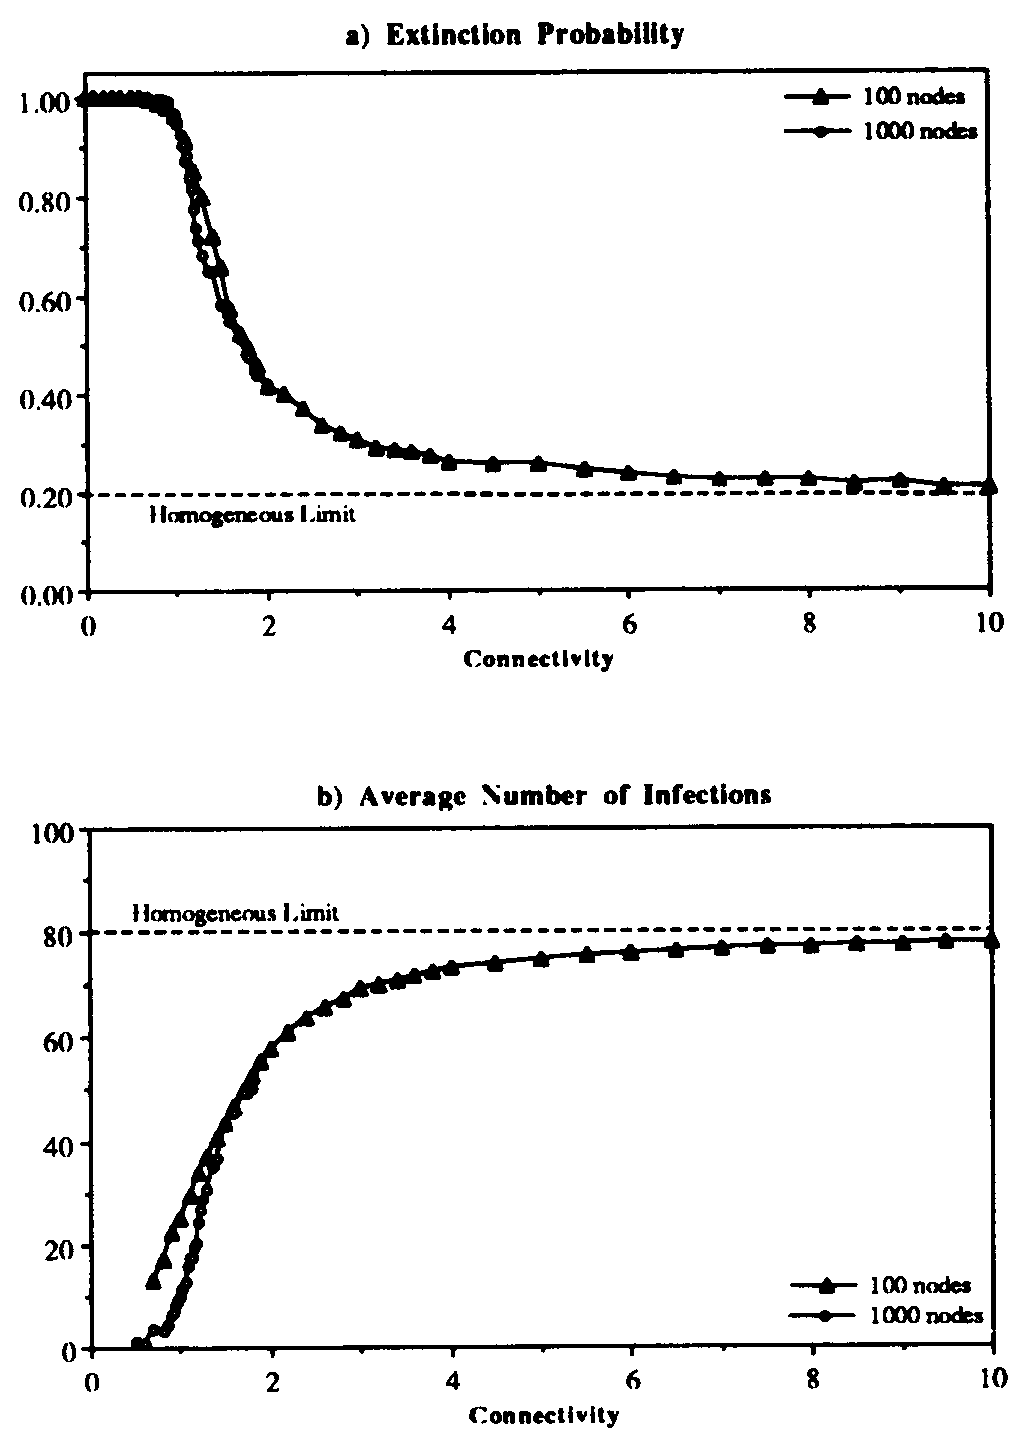 Figure 5: Extinction probability (a) and average number of infections (b) vs. connectivity \overline{b} for random graph with the usual infection and cure rates: \beta'=1.0 and \delta=0.2. Each point represents an average over 2500 simulation runs. For \overline{b} \lt 1, it was extremely rare for an epidemic to survive beyond the time limit of 1200, despite the fact that the infection rate is 5 times the classical epidemic threshold. For higher connectivities, the extinction probability and the average number of infected individuals approach the values predicted by the classical homogeneous interaction theory. The dependence of these quantities upon the connectivity changes very little when the number of nodes in the graph is increased from 100 to 1000; the transition region becomes slightly sharper. (Note: the measured equilibria for 1000-node graphs have been divided by 10 to scale them properly to the 100-node results.)